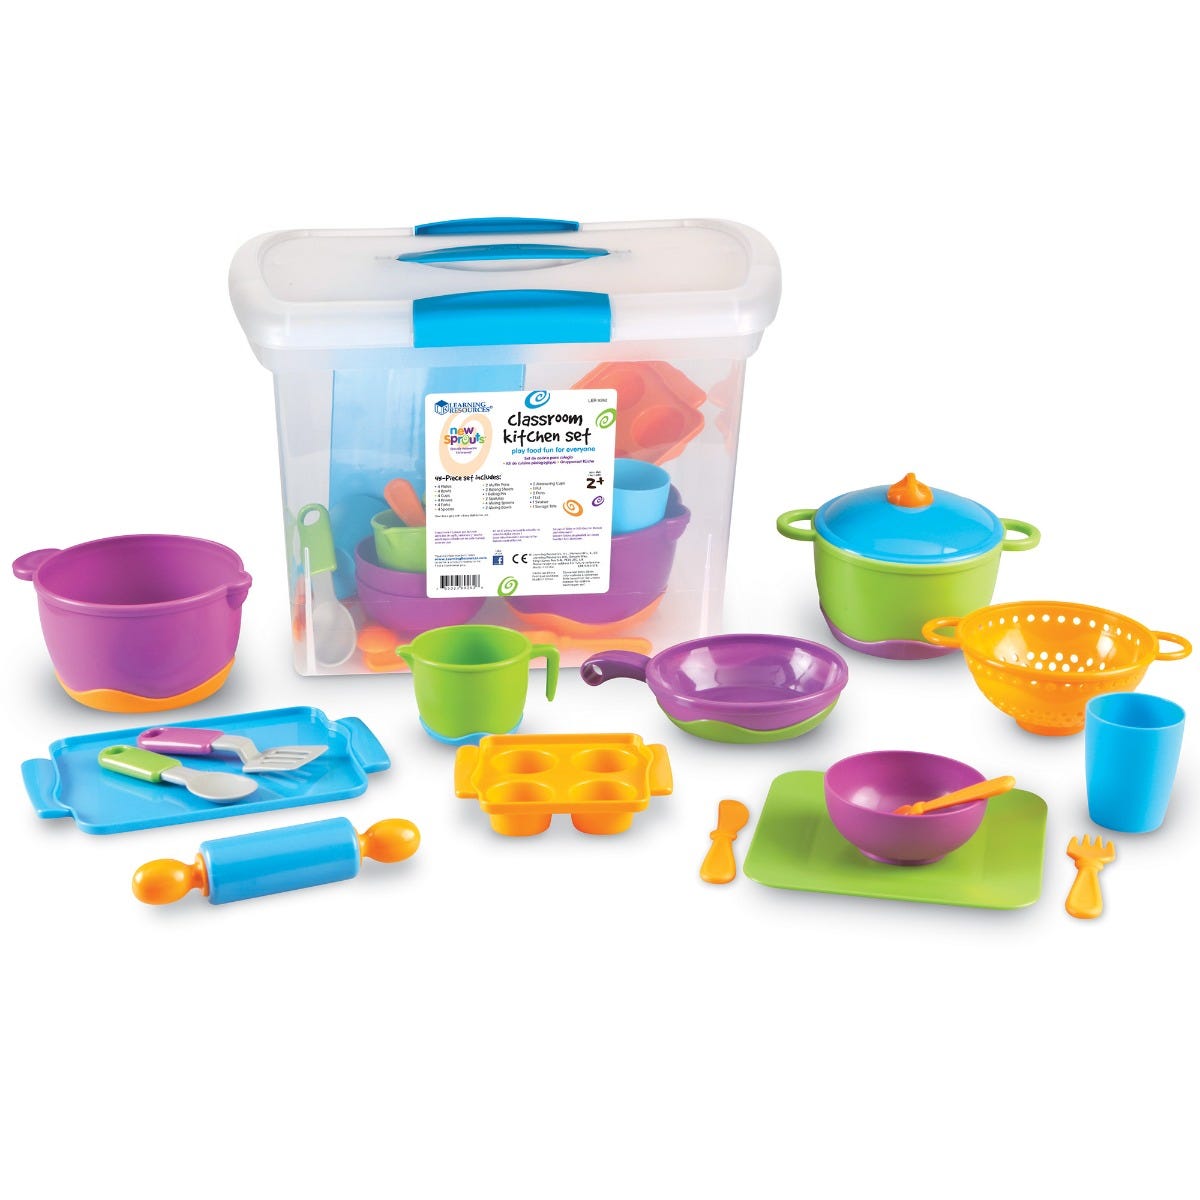 New Sprouts Classroom Kitchen Set